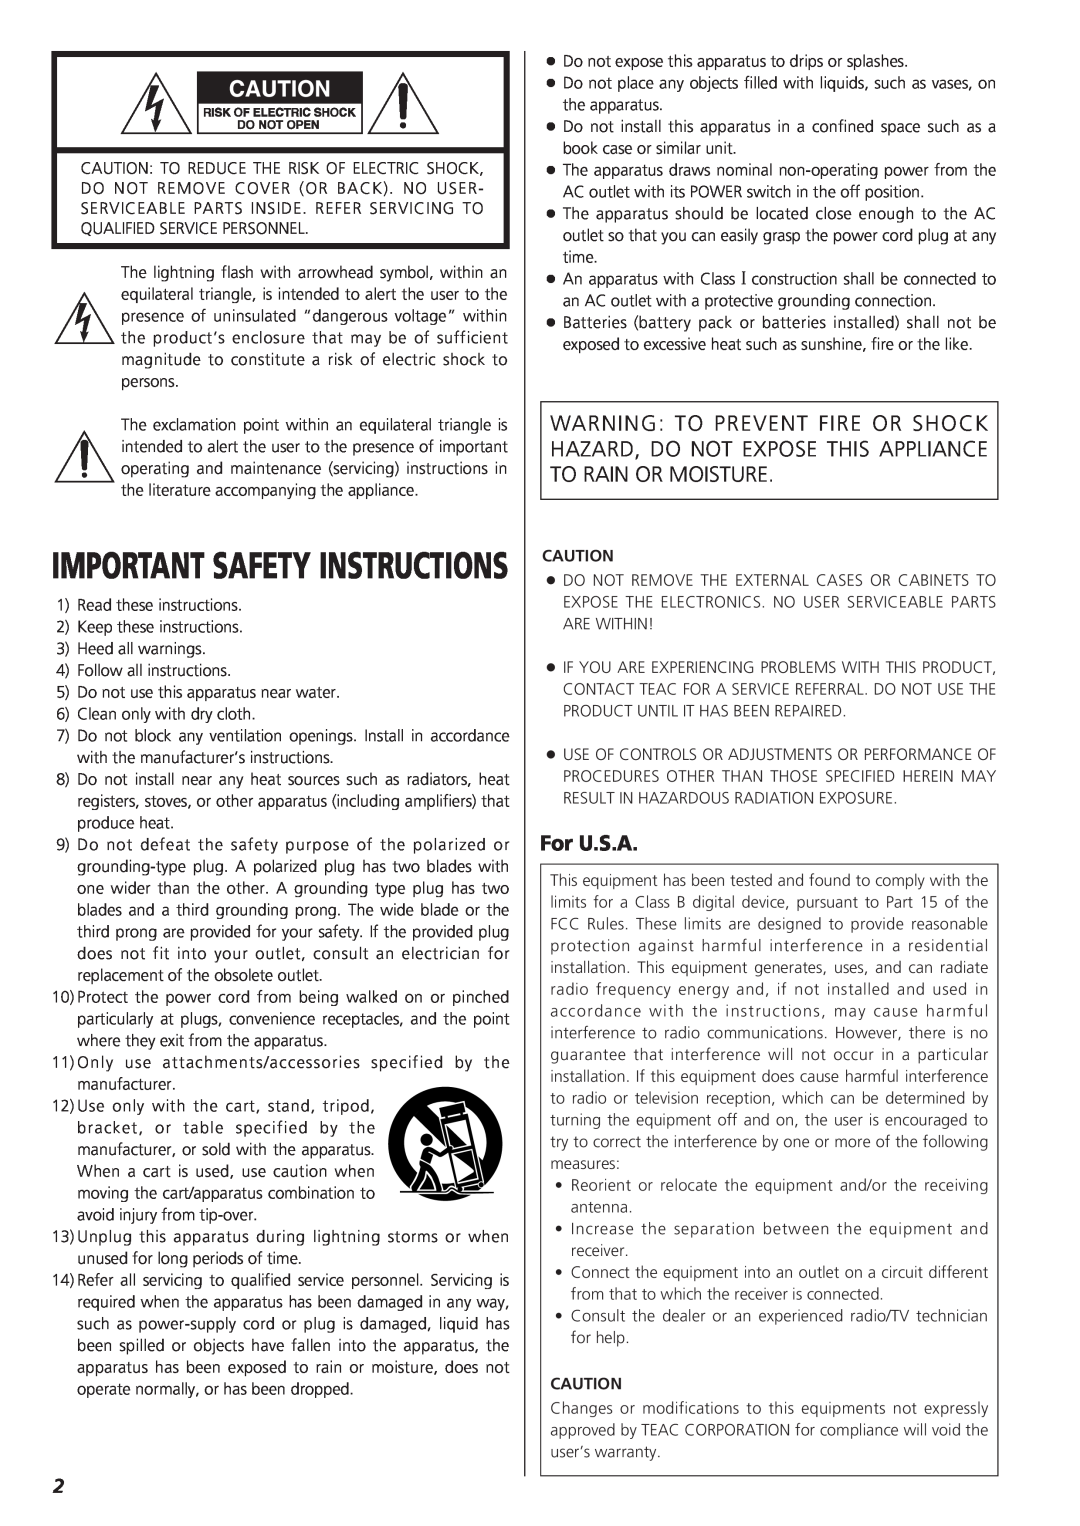 Teac X-01 D2 owner manual For U.S.A, Important Safety Instructions 